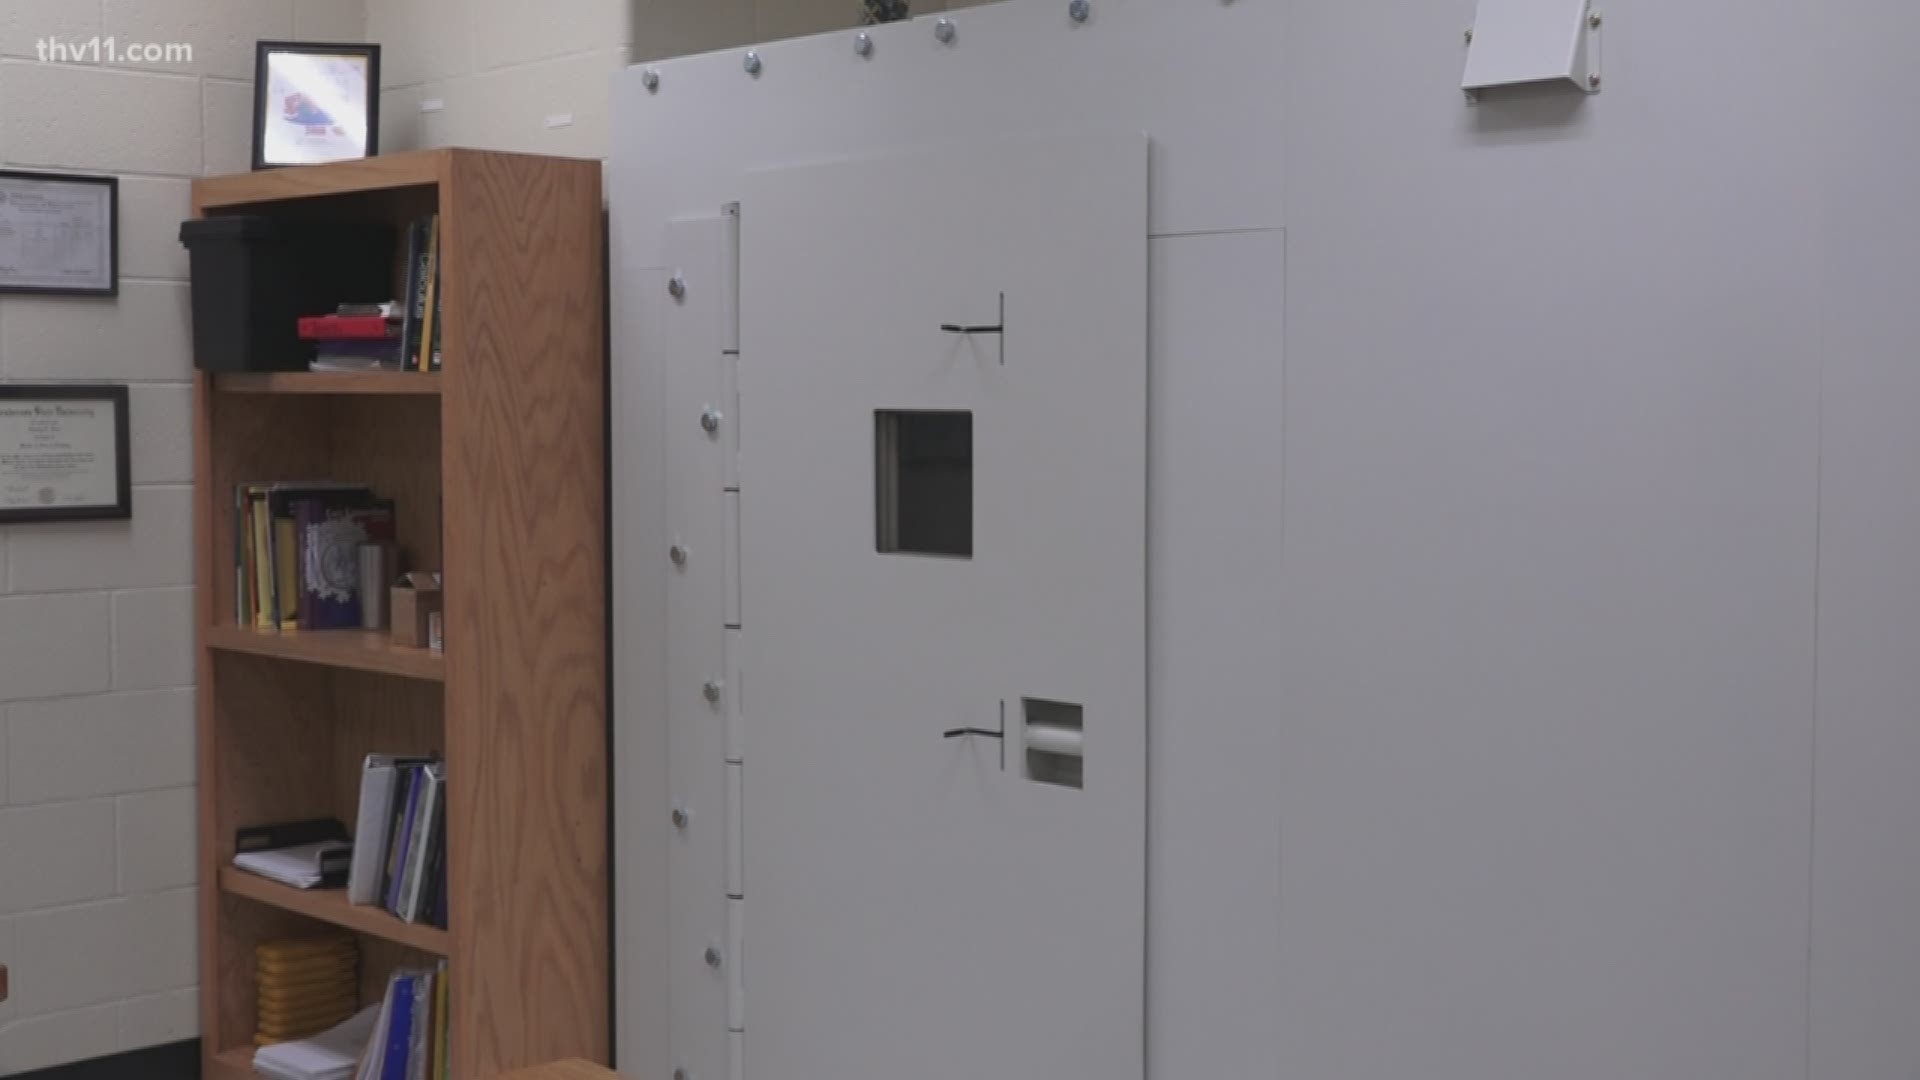 Quitman schools have installed ballistic steal safe rooms in every classroom across campus.